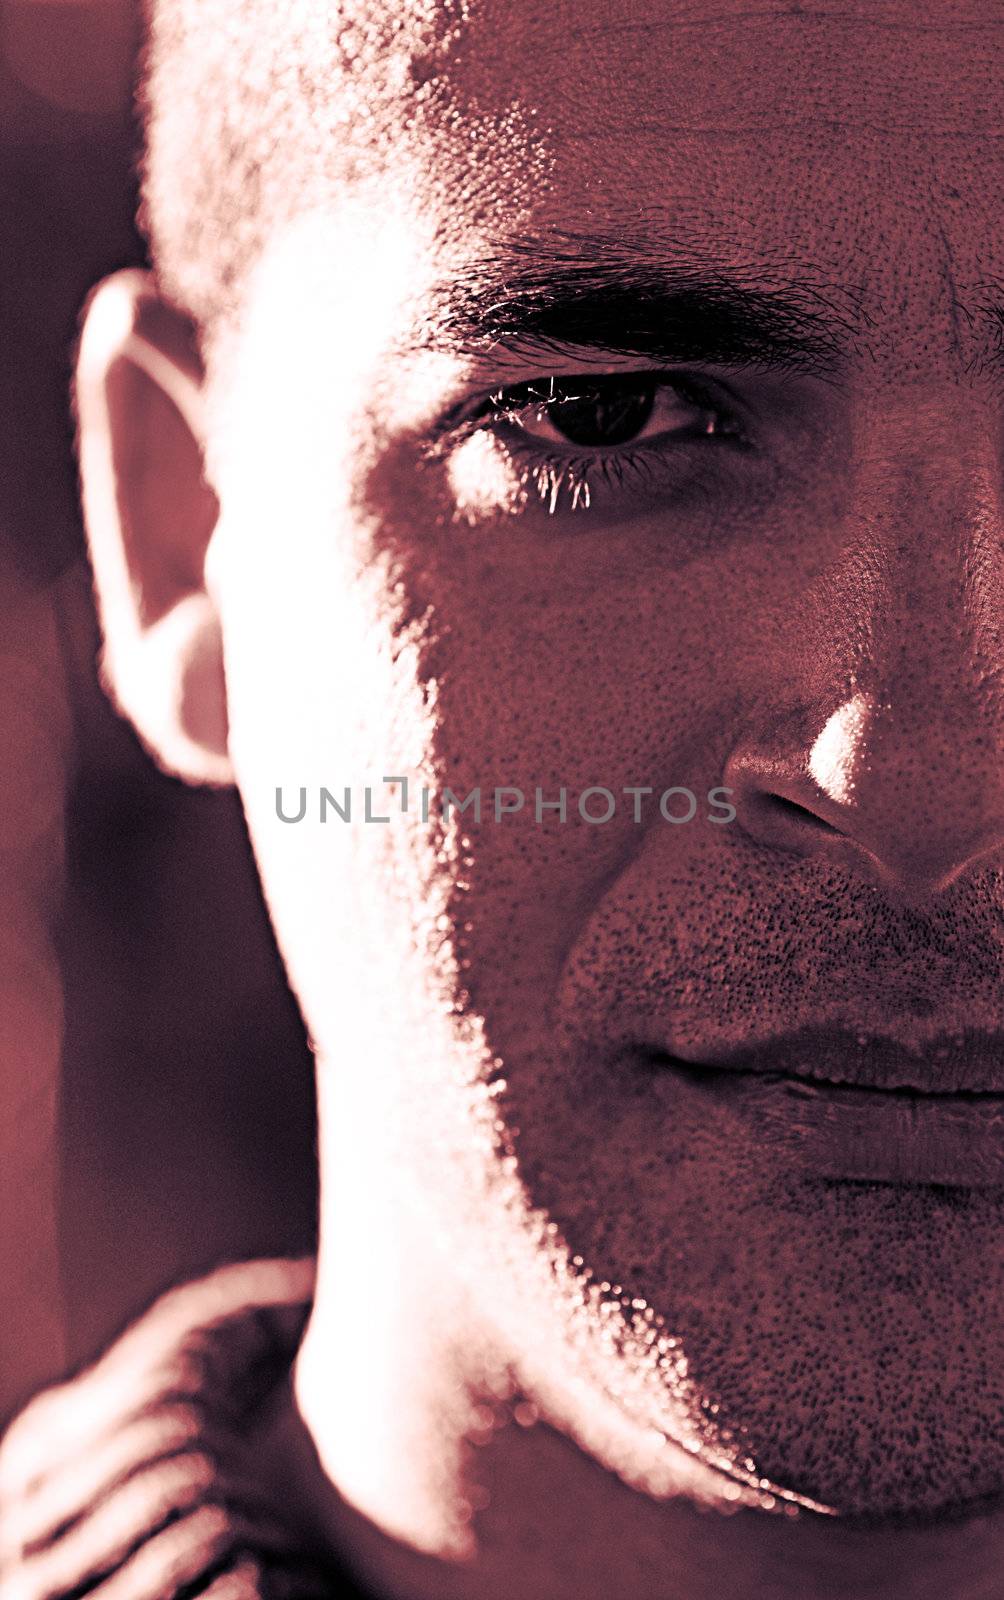 Closeup shot of one side of the face of a young man, with confident expression.